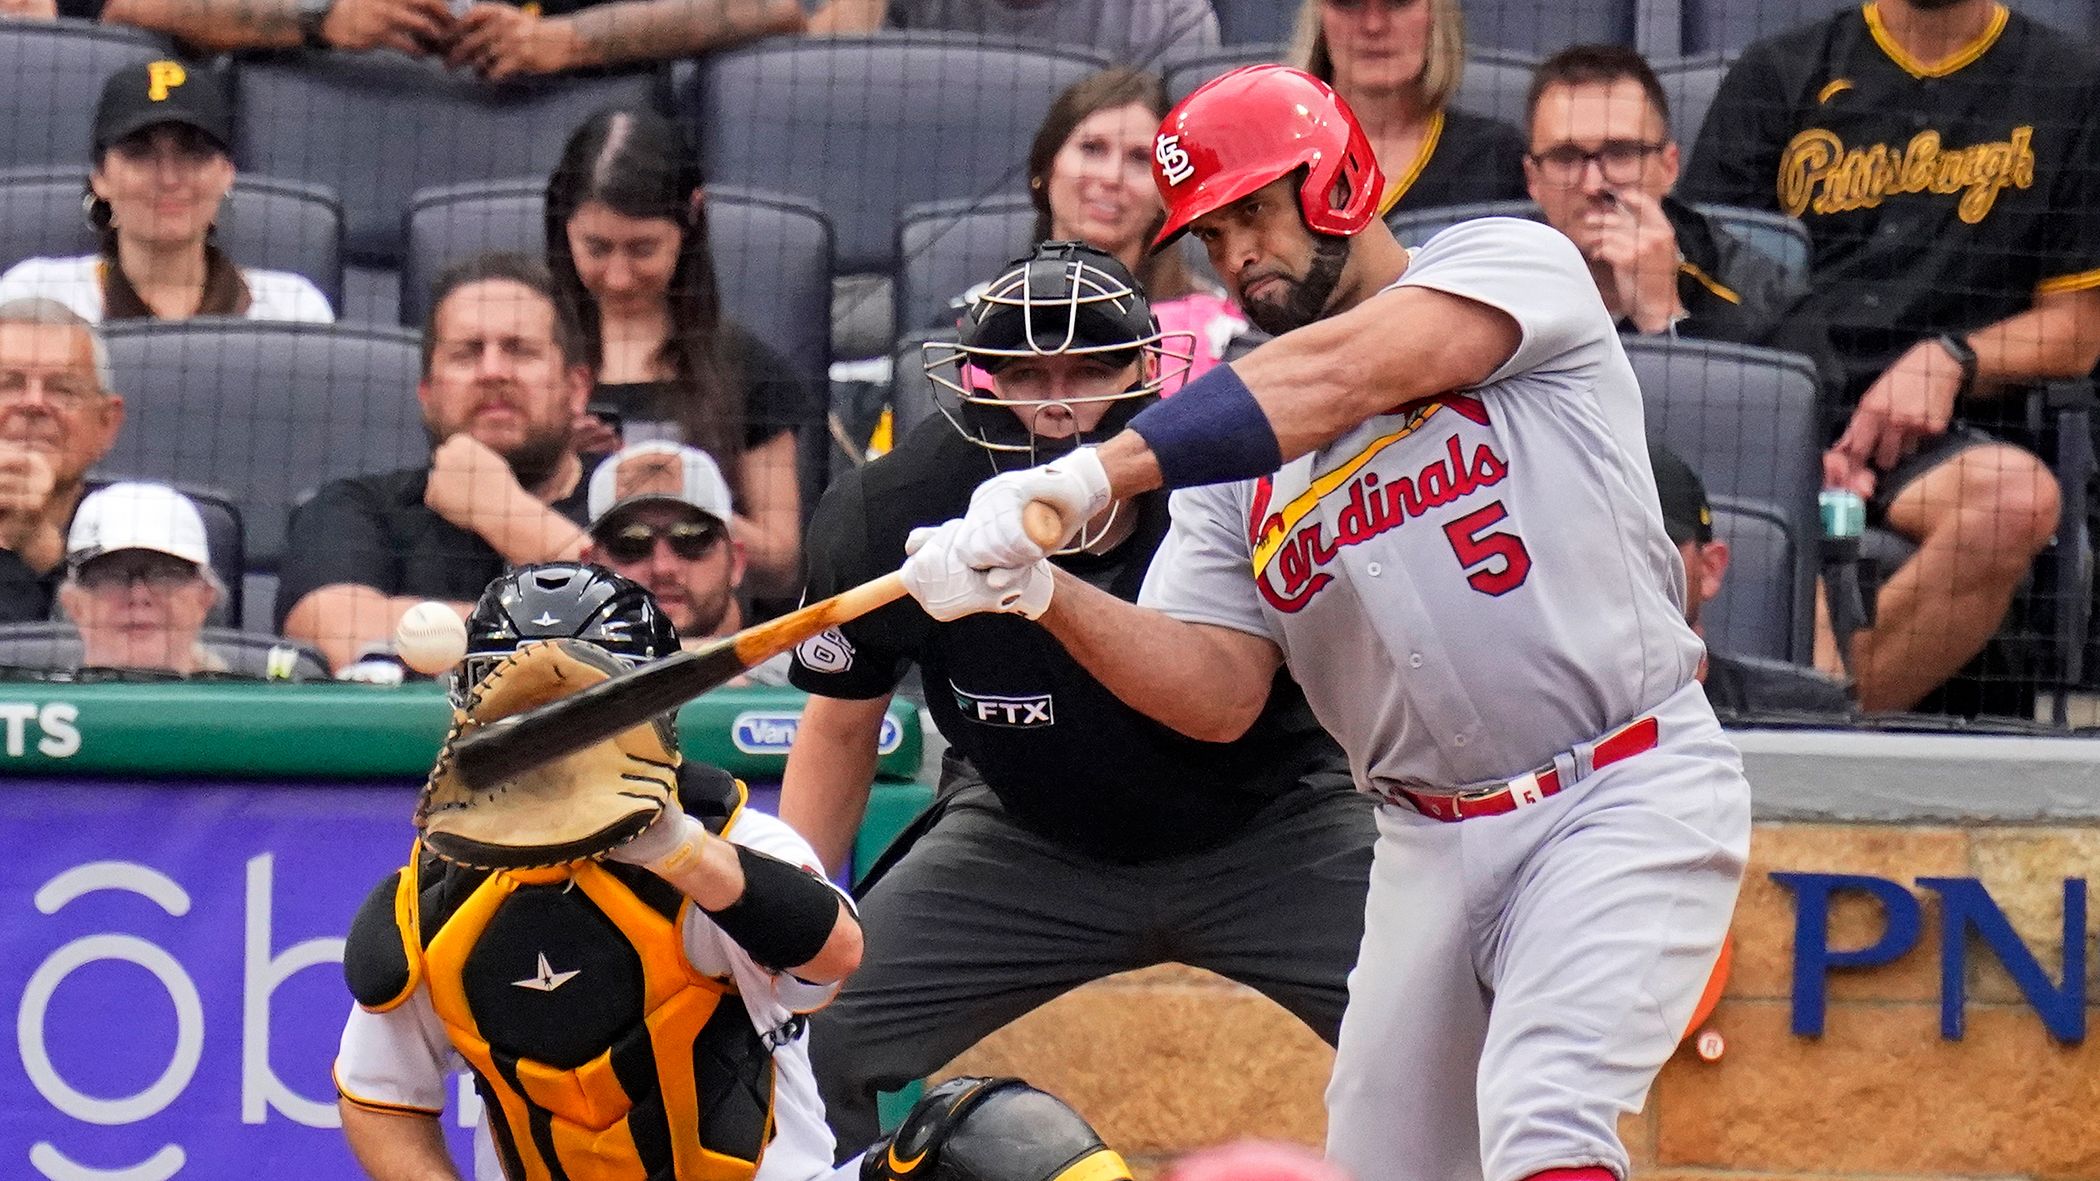 Albert Pujols cements place in history with HR No. 697